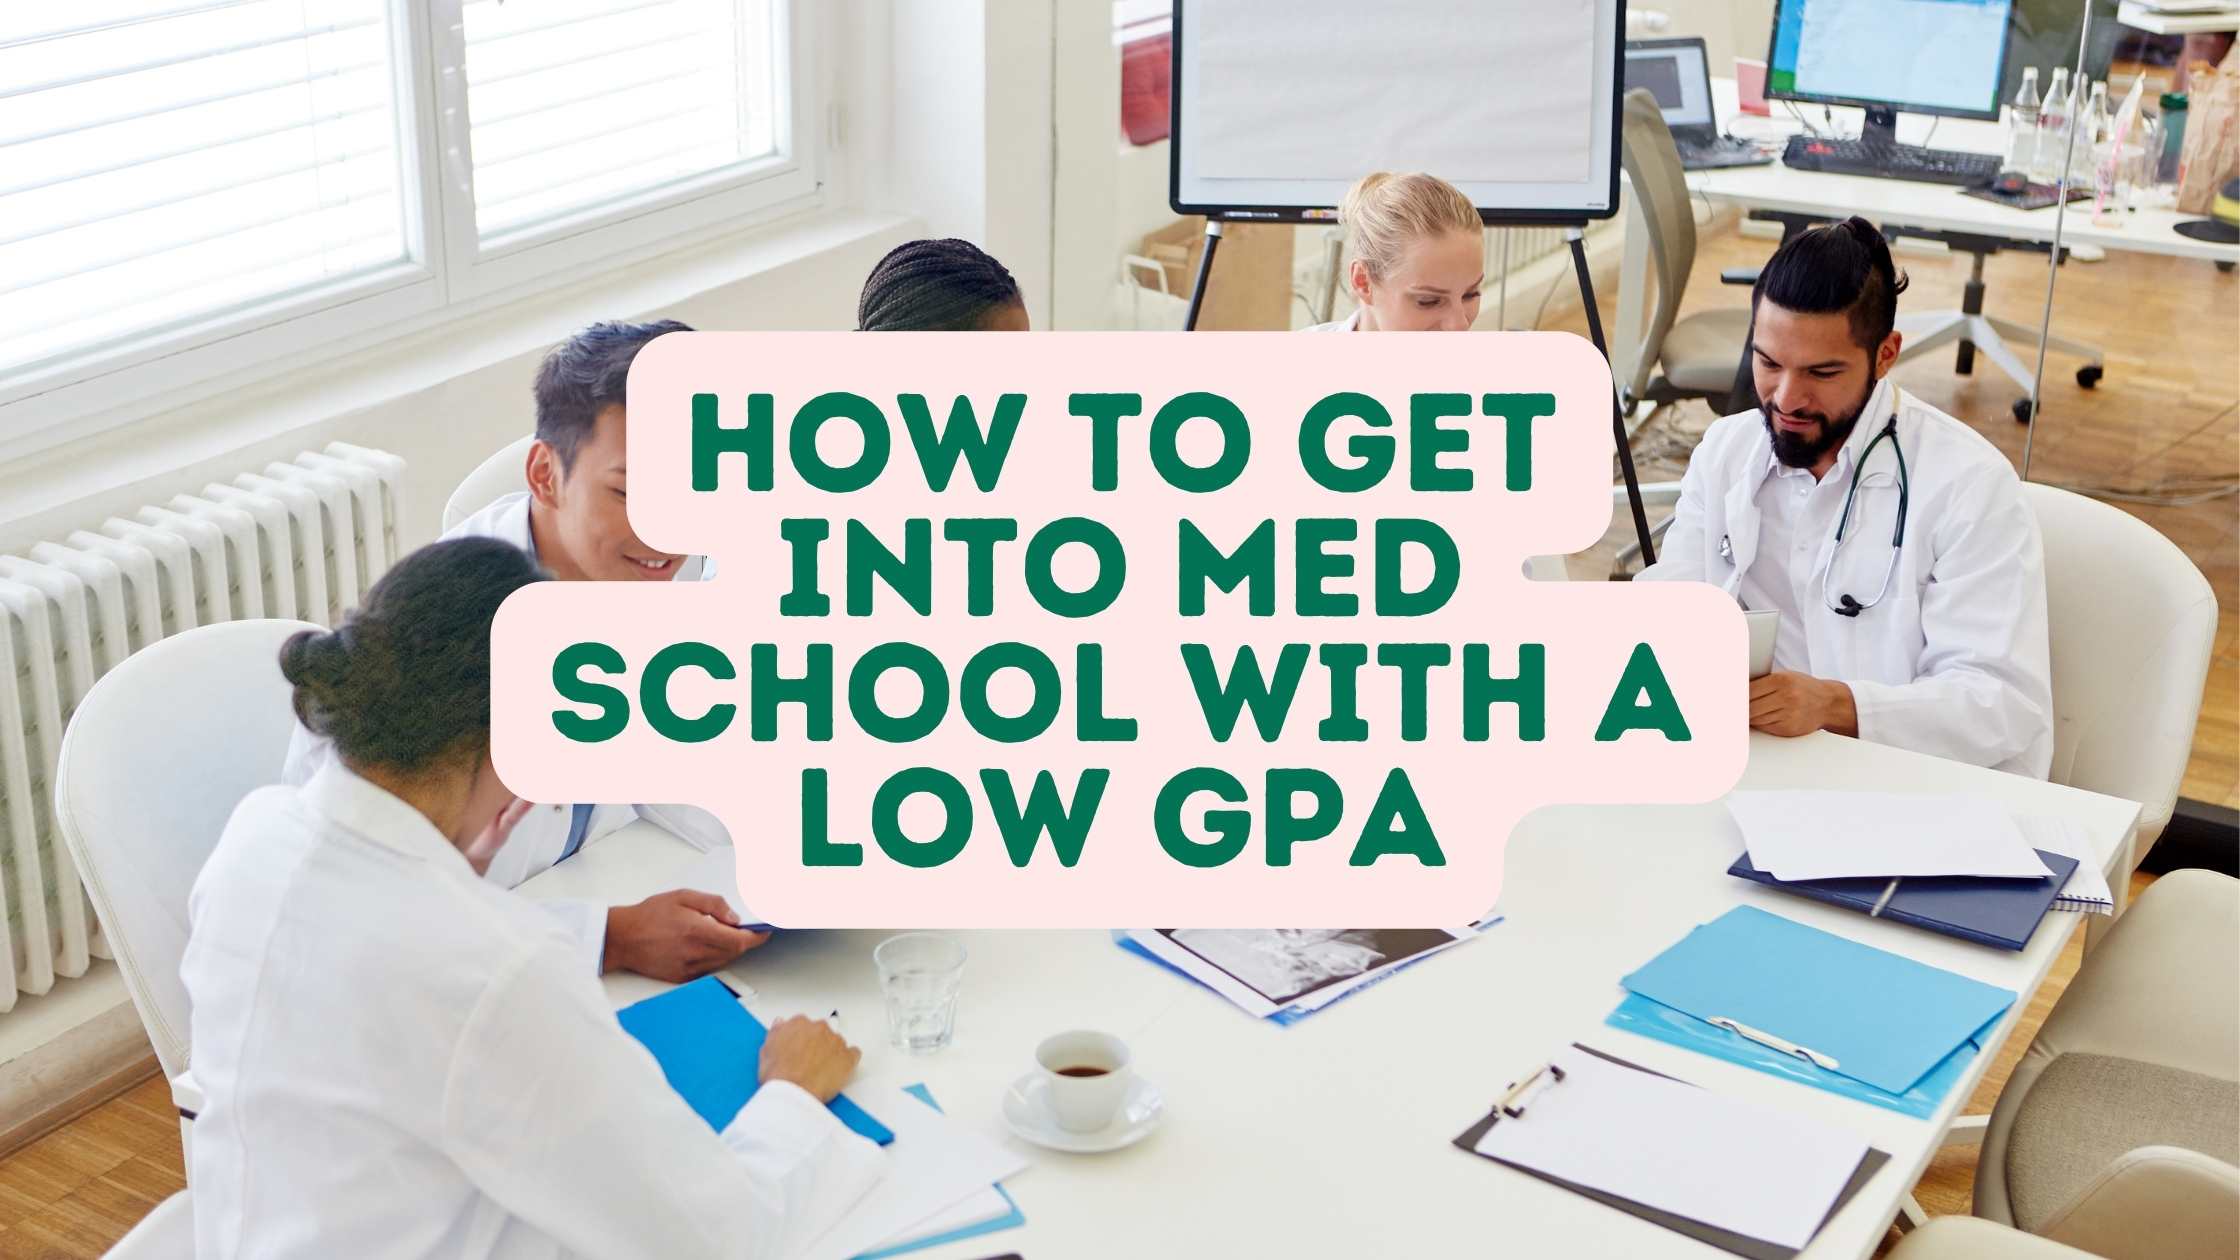 How To Get Into Med School With A Low GPA